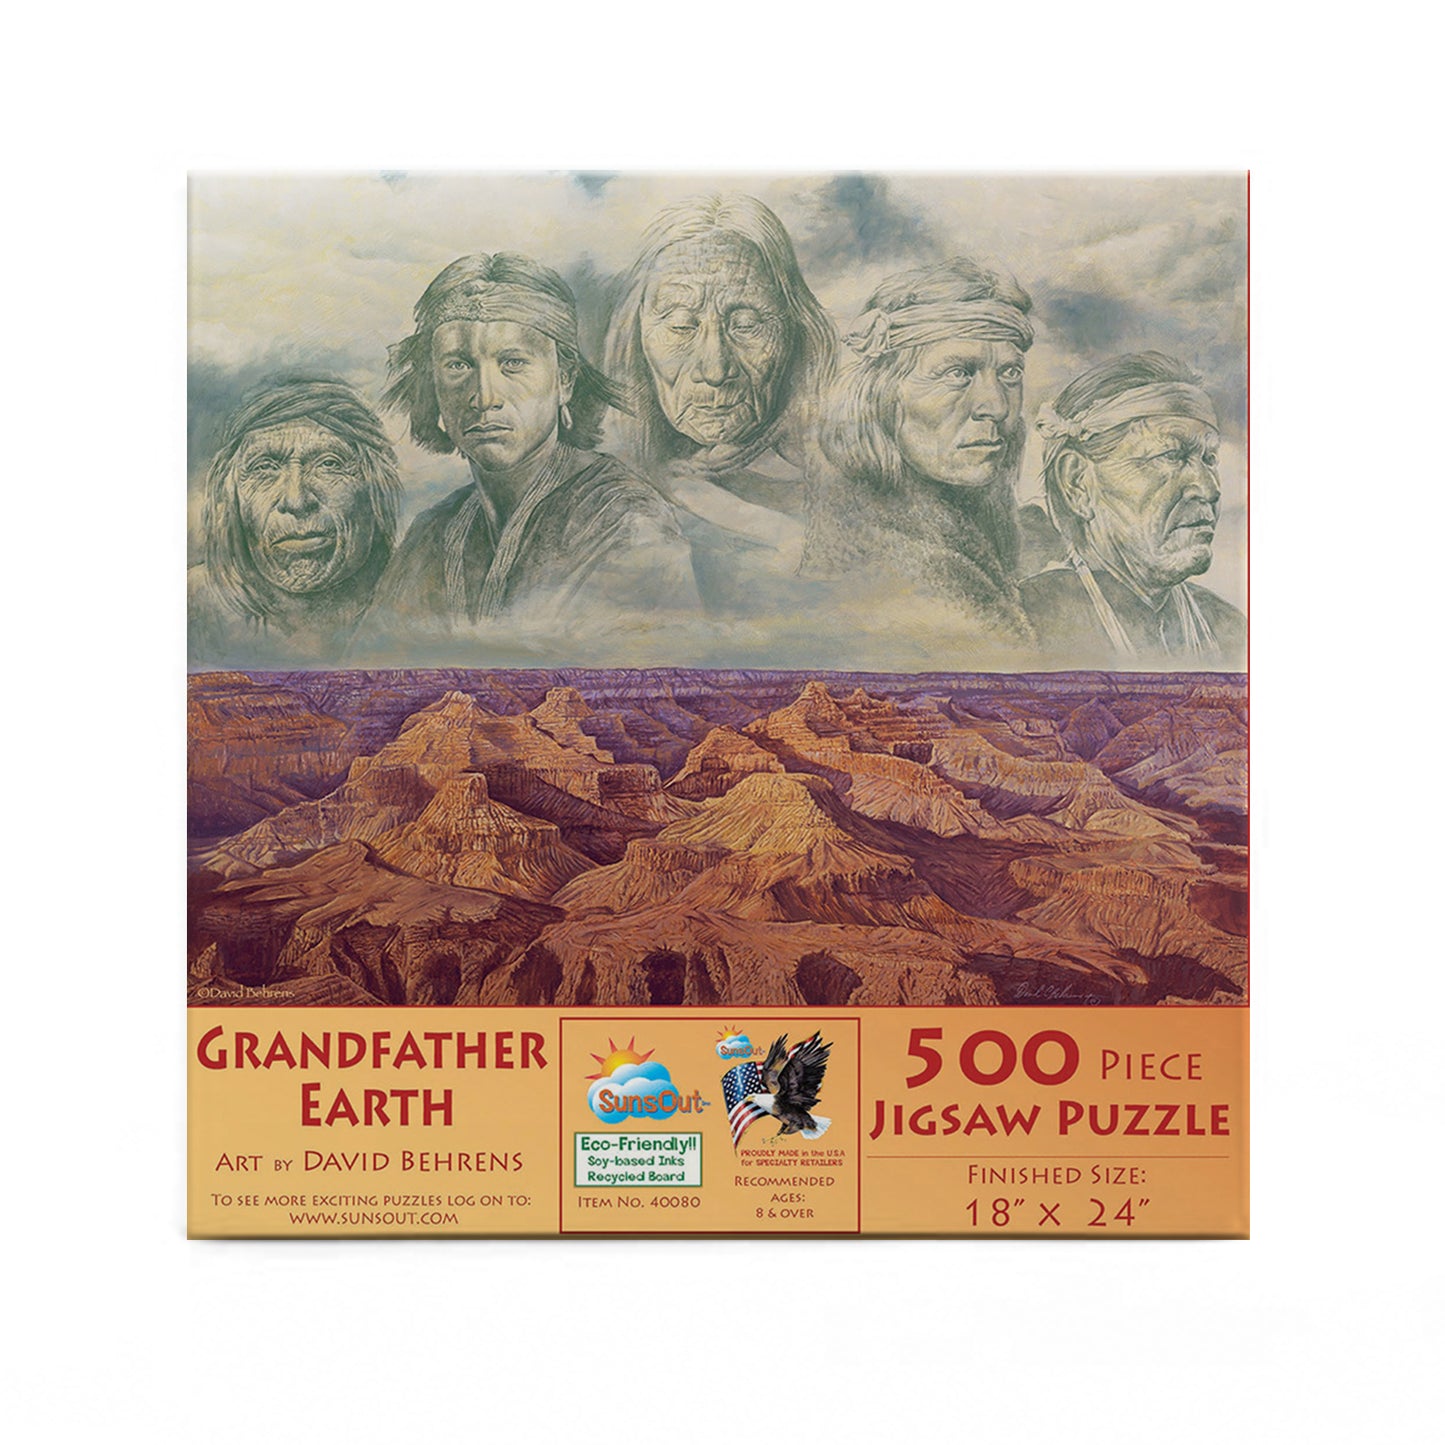 Grandfather Earth - 500 Piece Jigsaw Puzzle